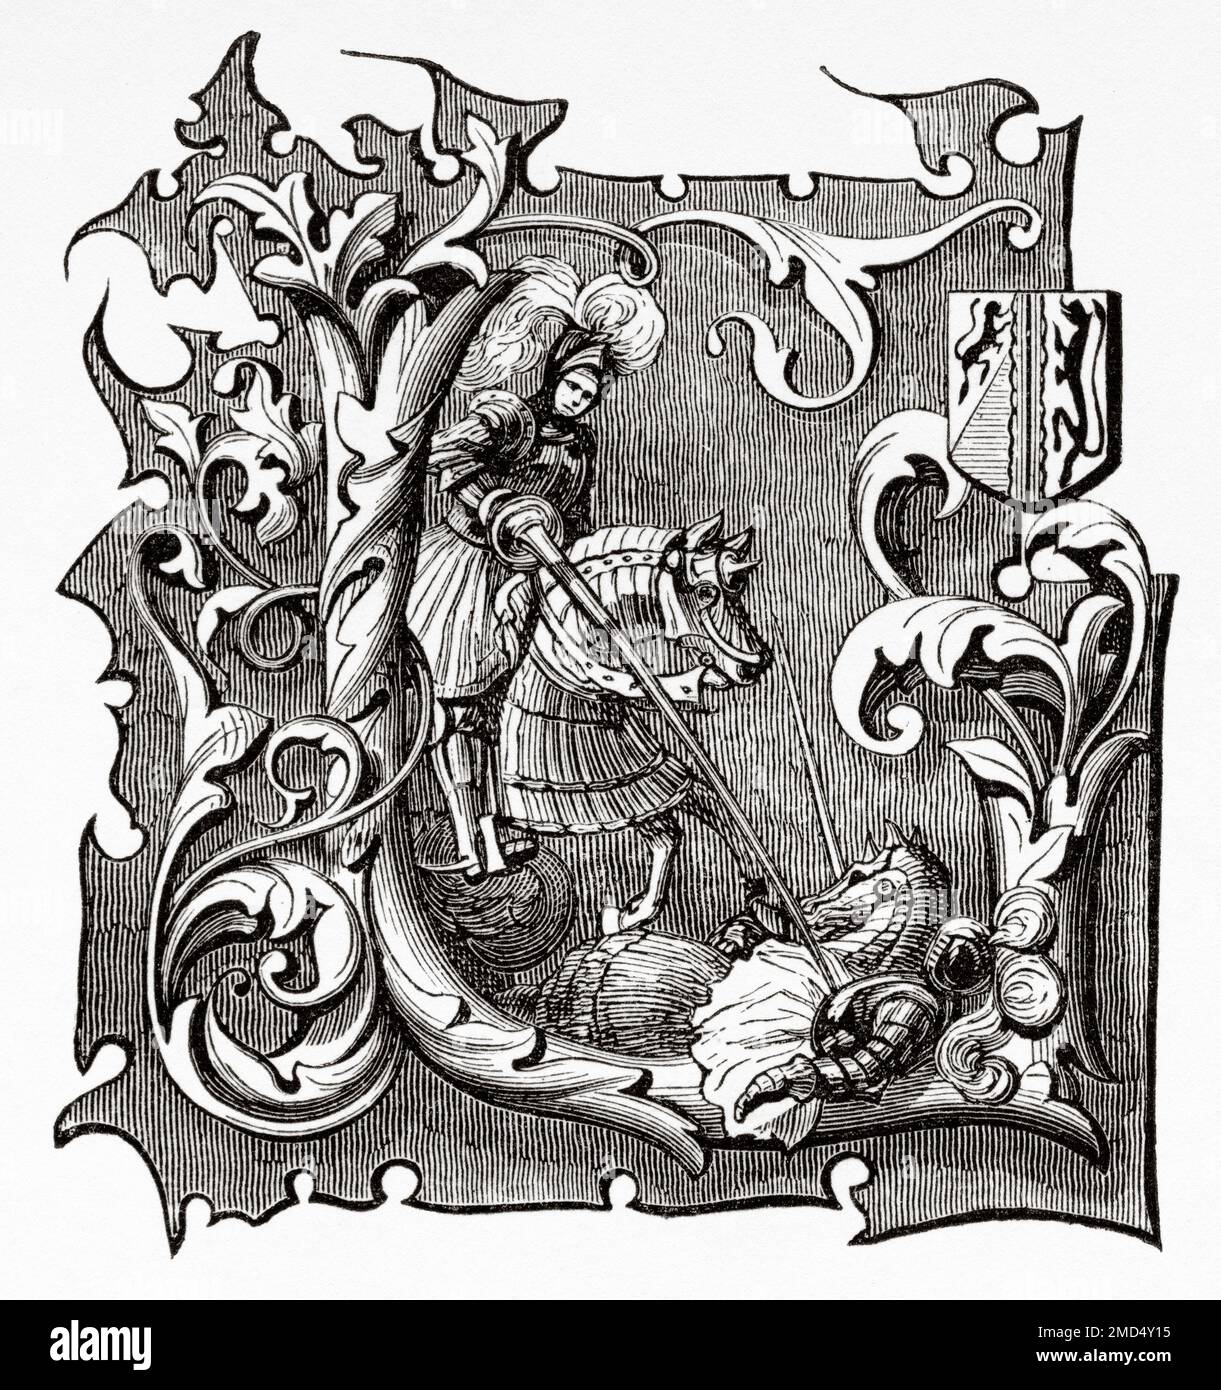 Middle ages initial capital letter L depicting a fight on horseback between knights. The Arts of the Middle Ages and at the Period of the Renaissance by Paul Lacroix, 1874 Stock Photo